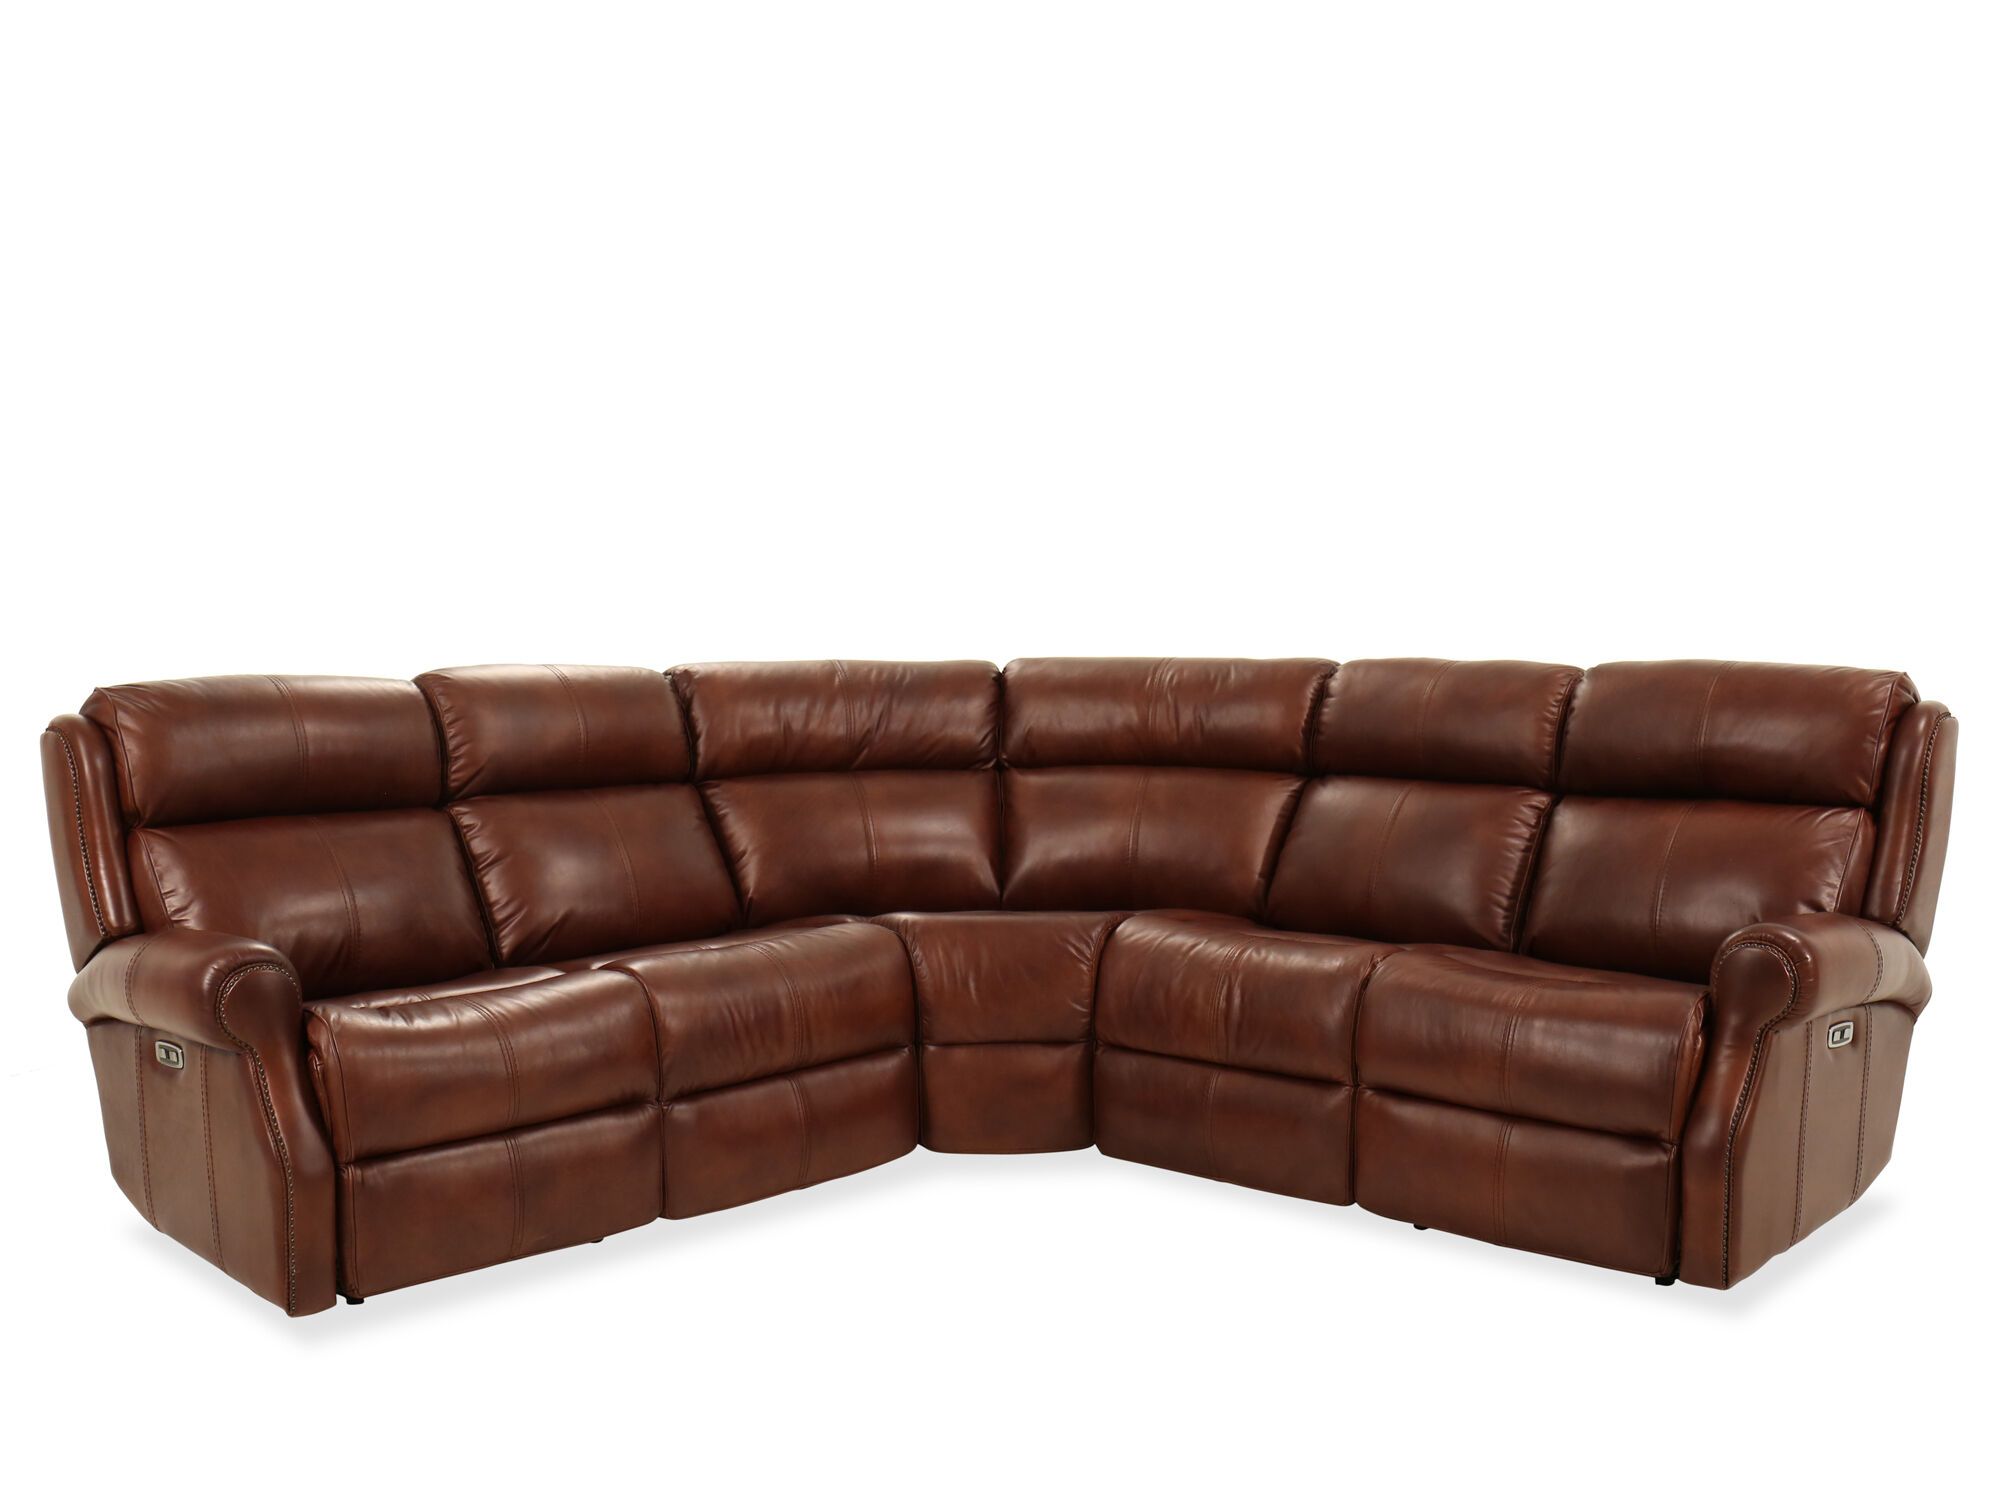 Three Piece Leather 106.5" Power Reclining Sectional In Brown | Mathis Pertaining To 3 Piece Leather Sectional Sofa Sets (Gallery 12 of 20)